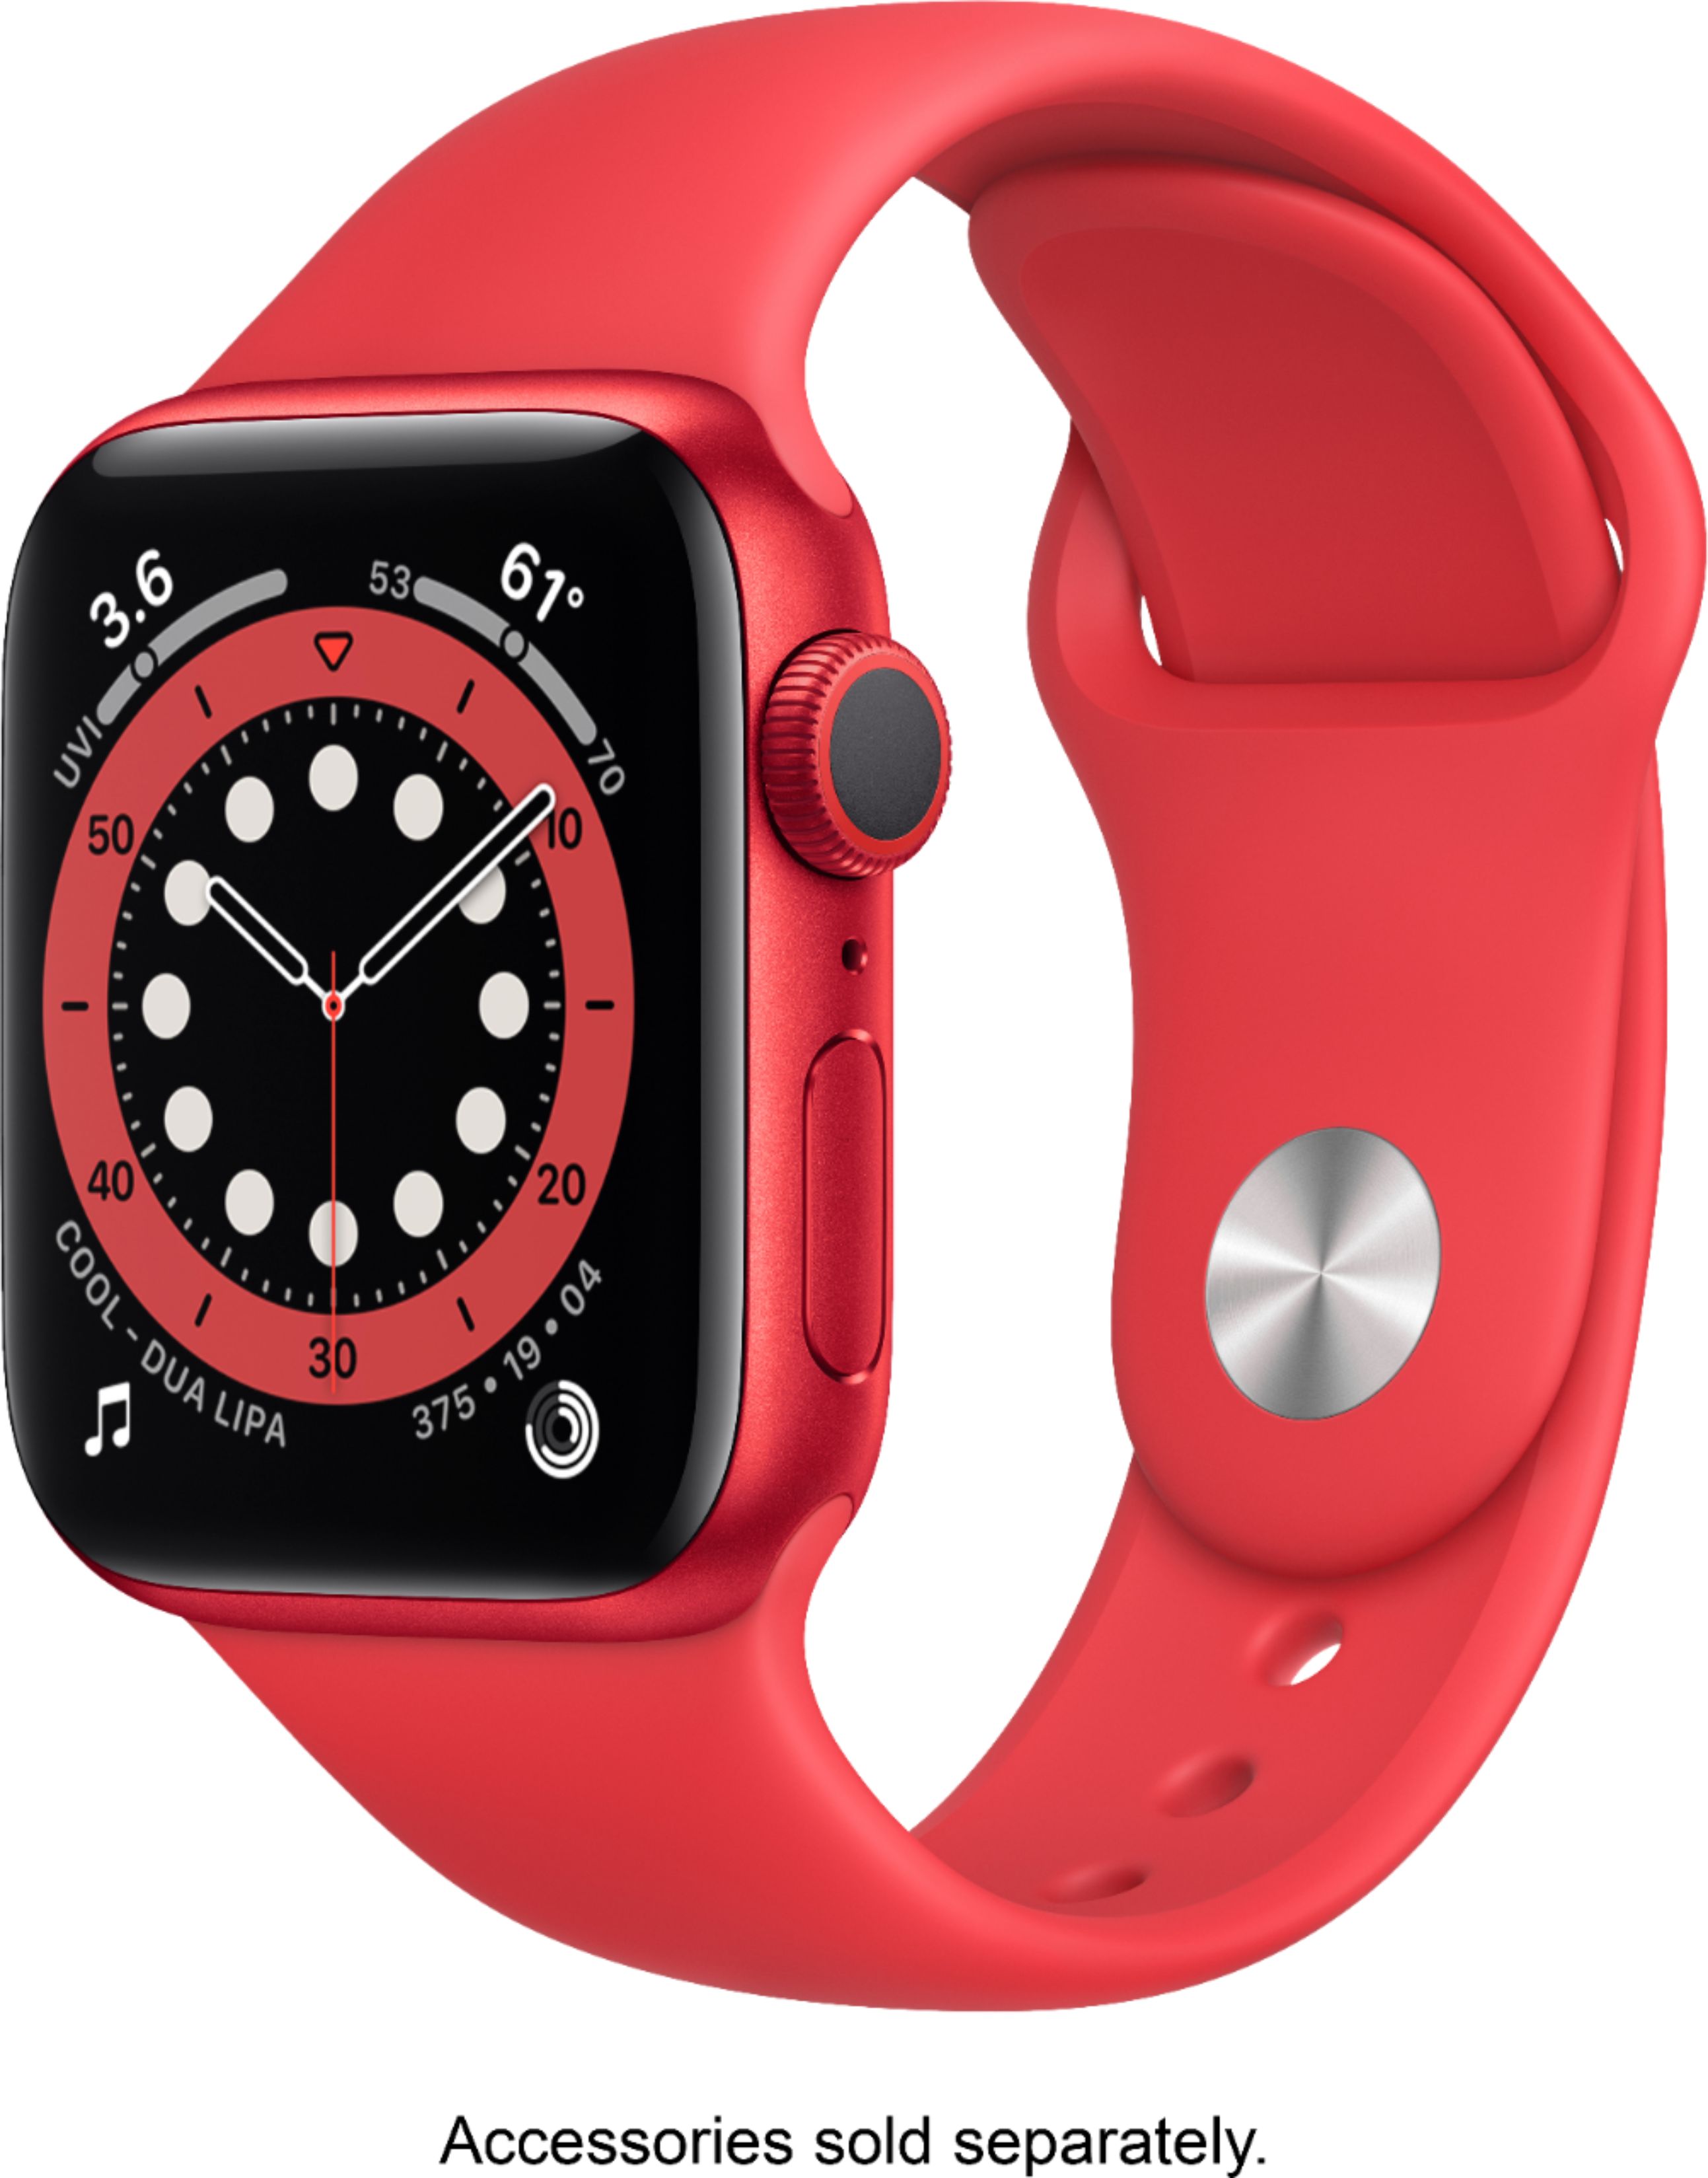 Apple Watch Series 6 (PRODUCT)RED 40mm